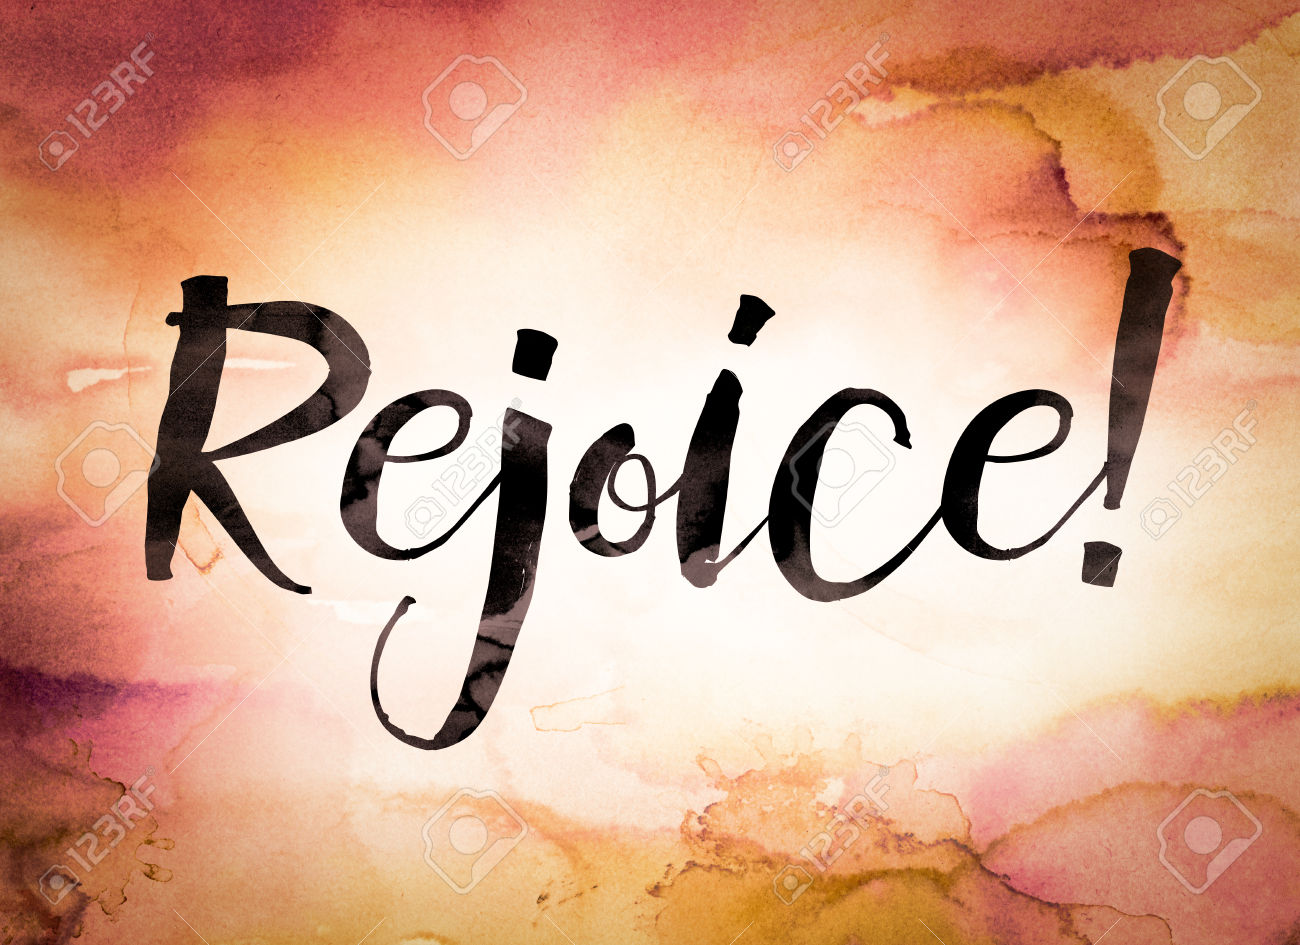 The word "Rejoice" written in black paint on a colorful watercolor washed background.